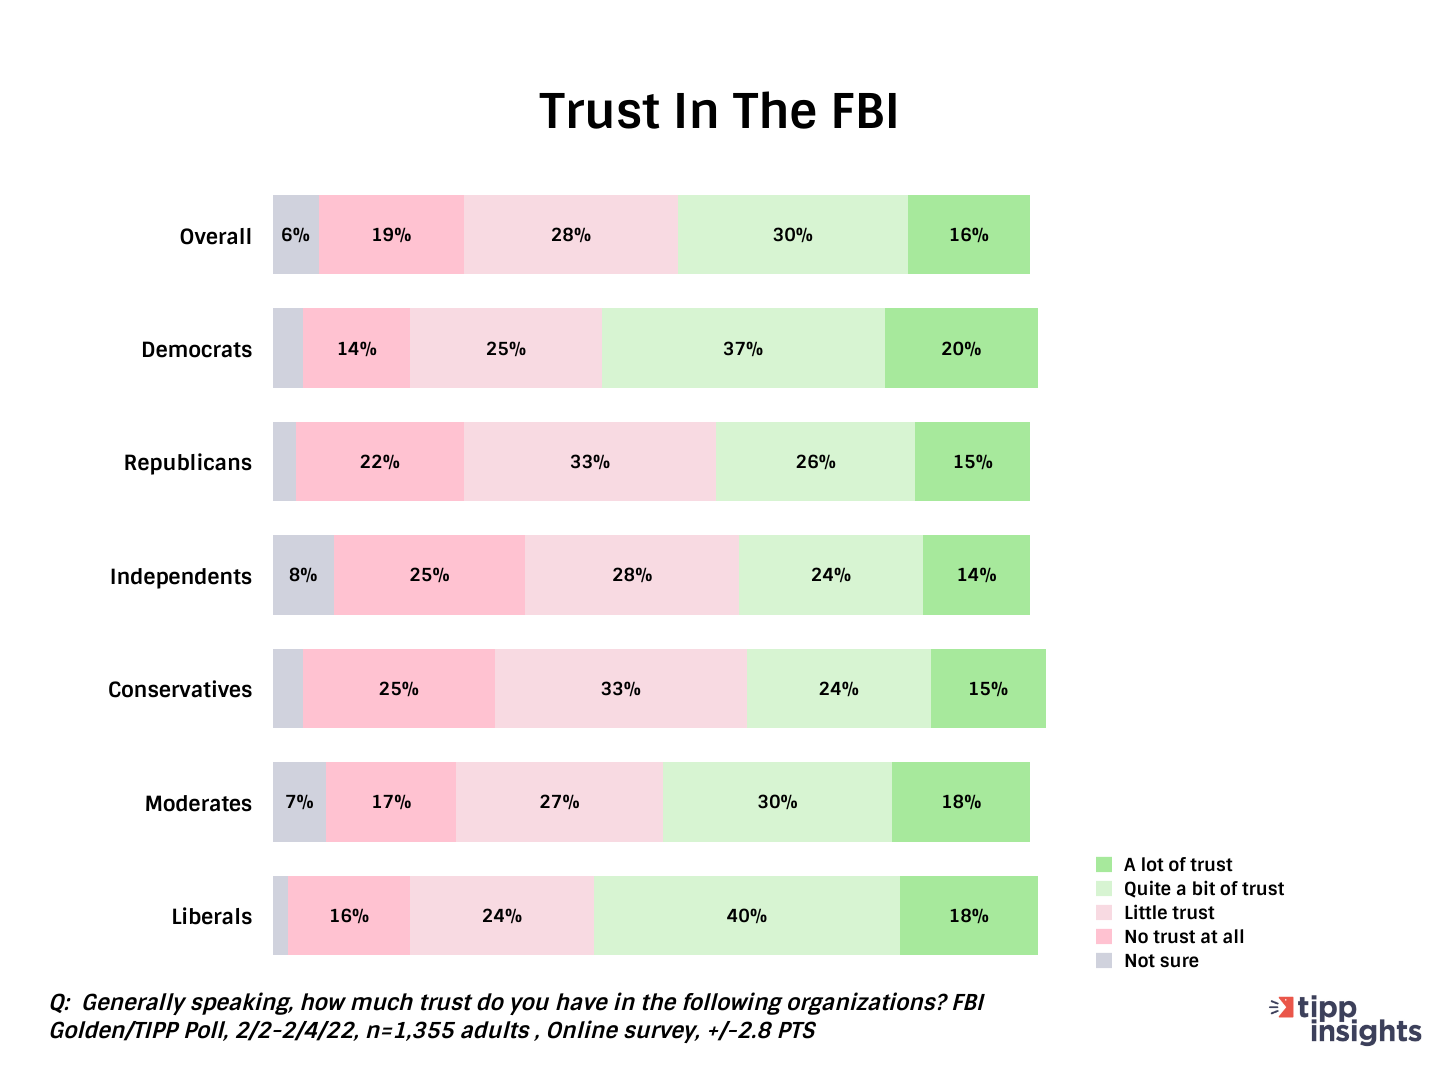 Golden/TIPP Poll Results: How much trust do Americans have in the FBI